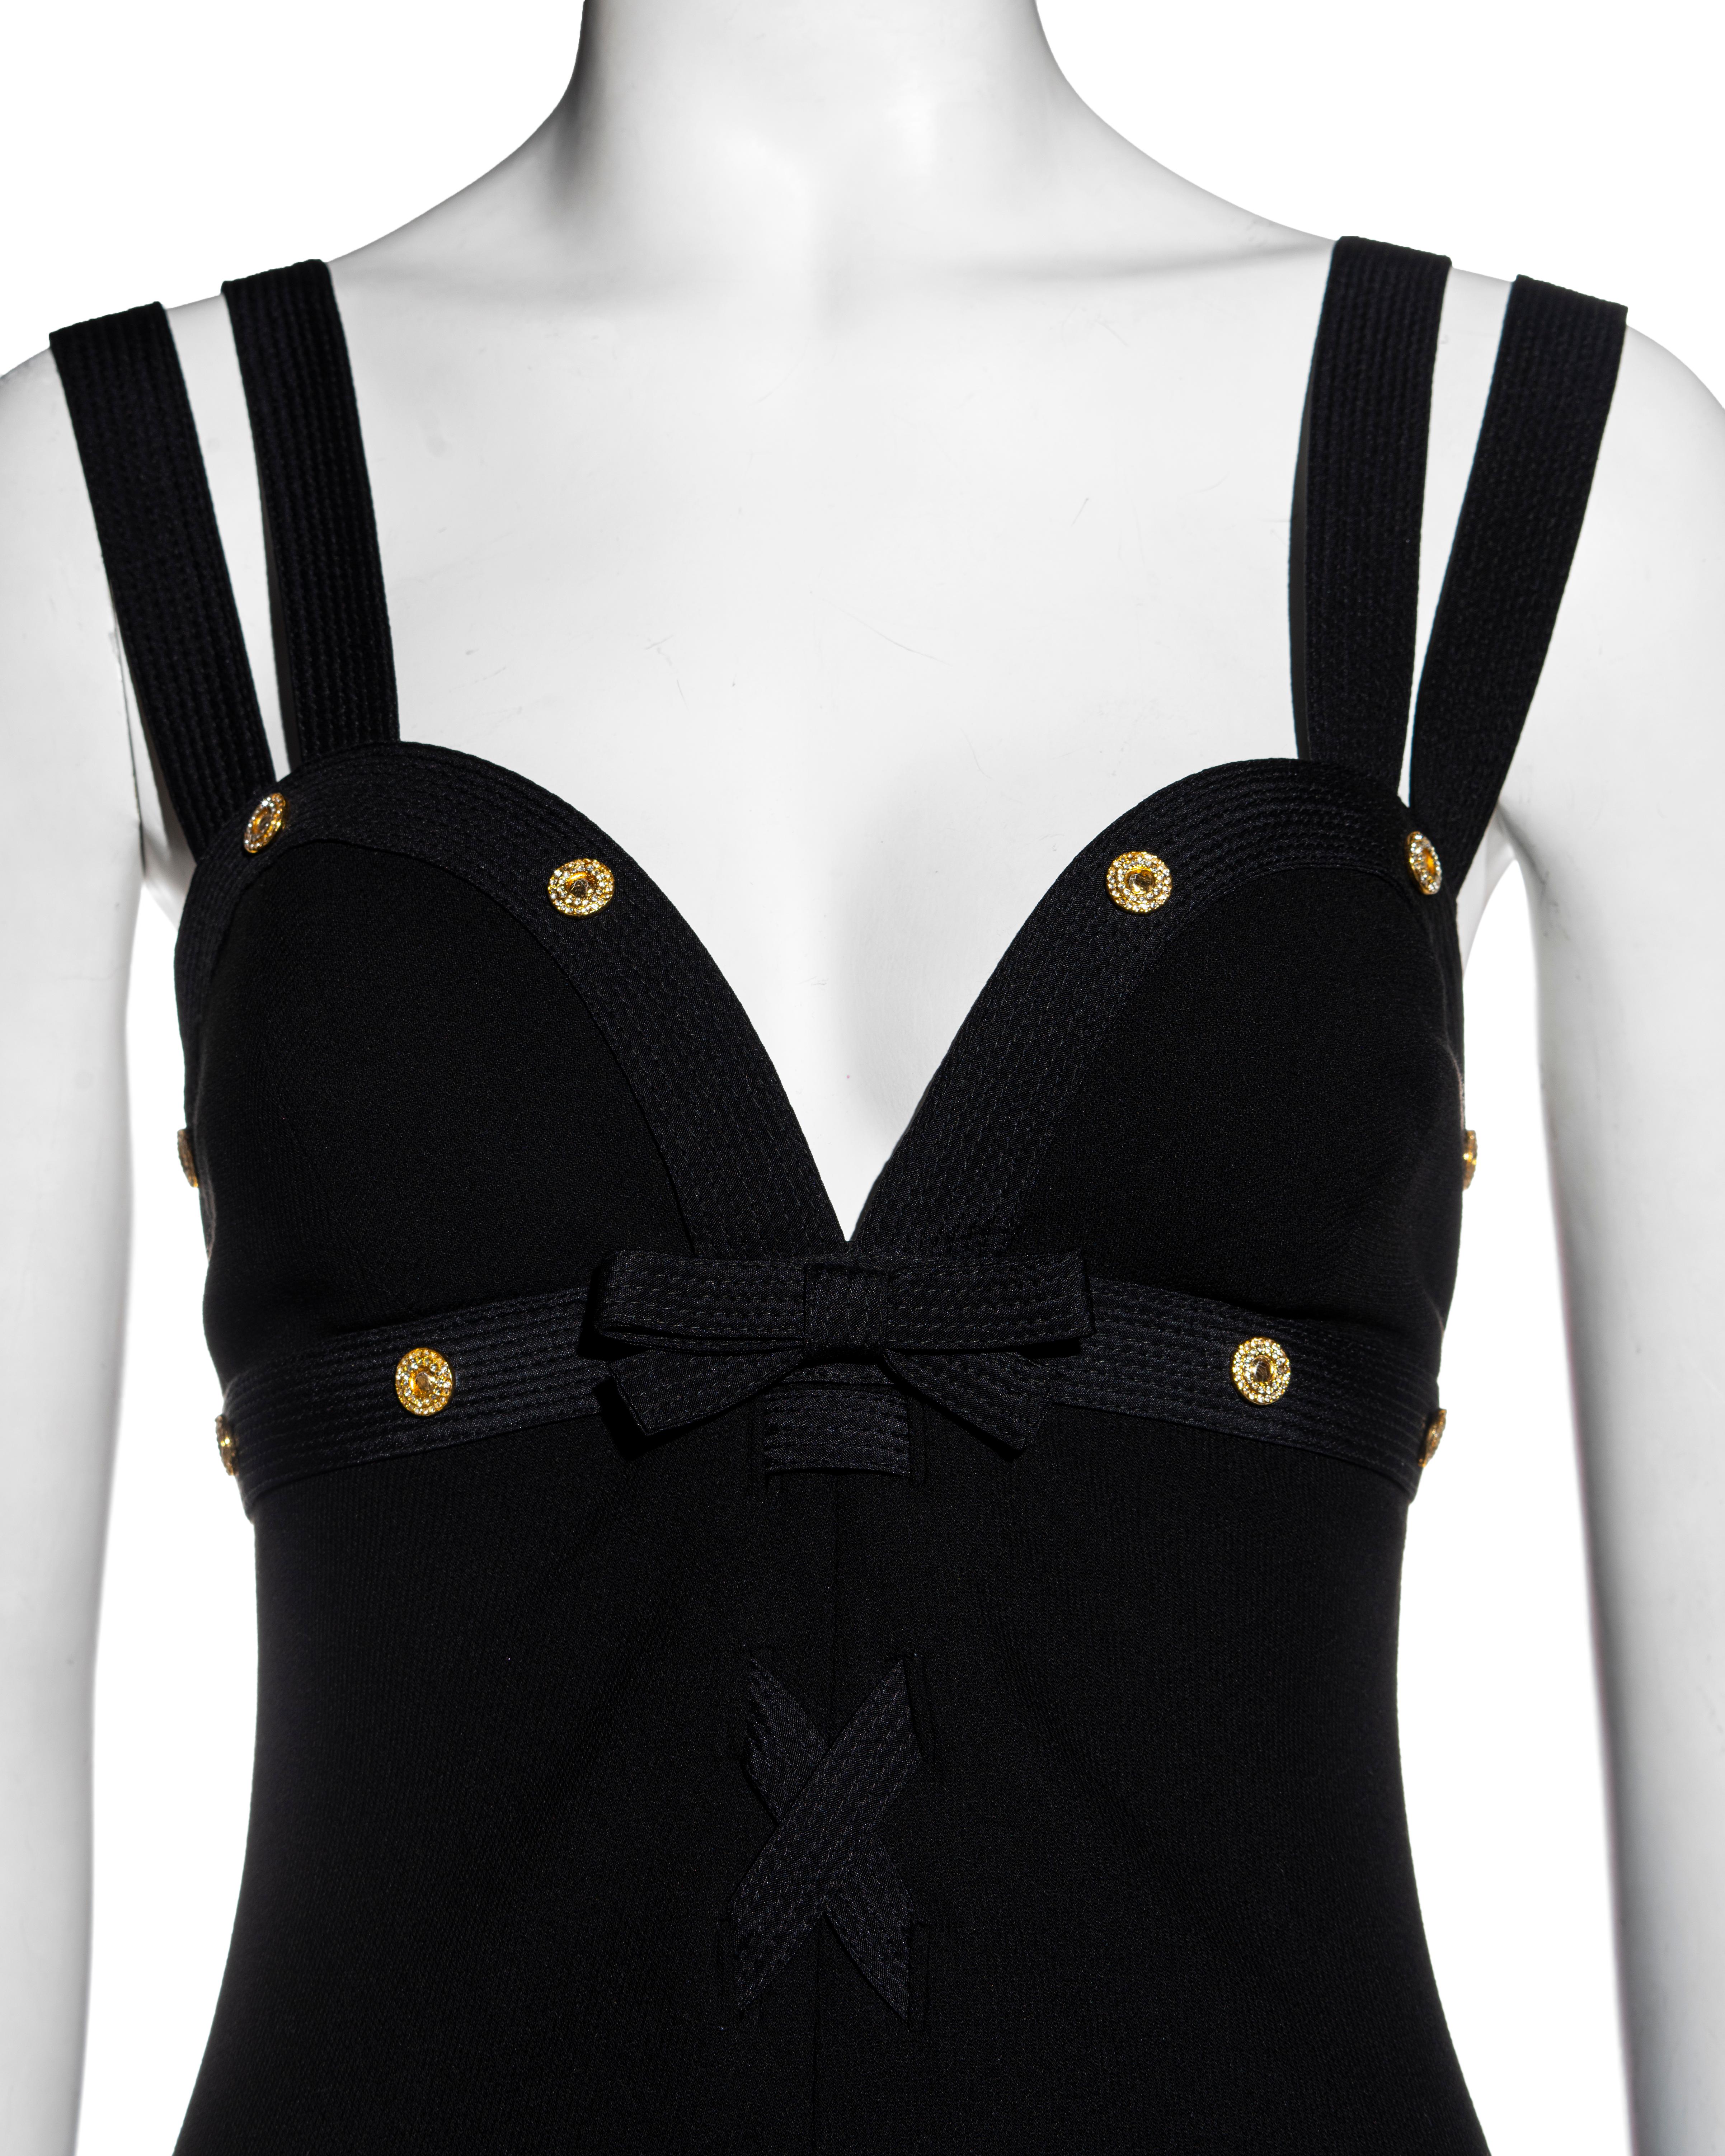 Gianni Versace black wool double strap playsuit with gold crystal studs, ss 1992 In Excellent Condition For Sale In London, GB